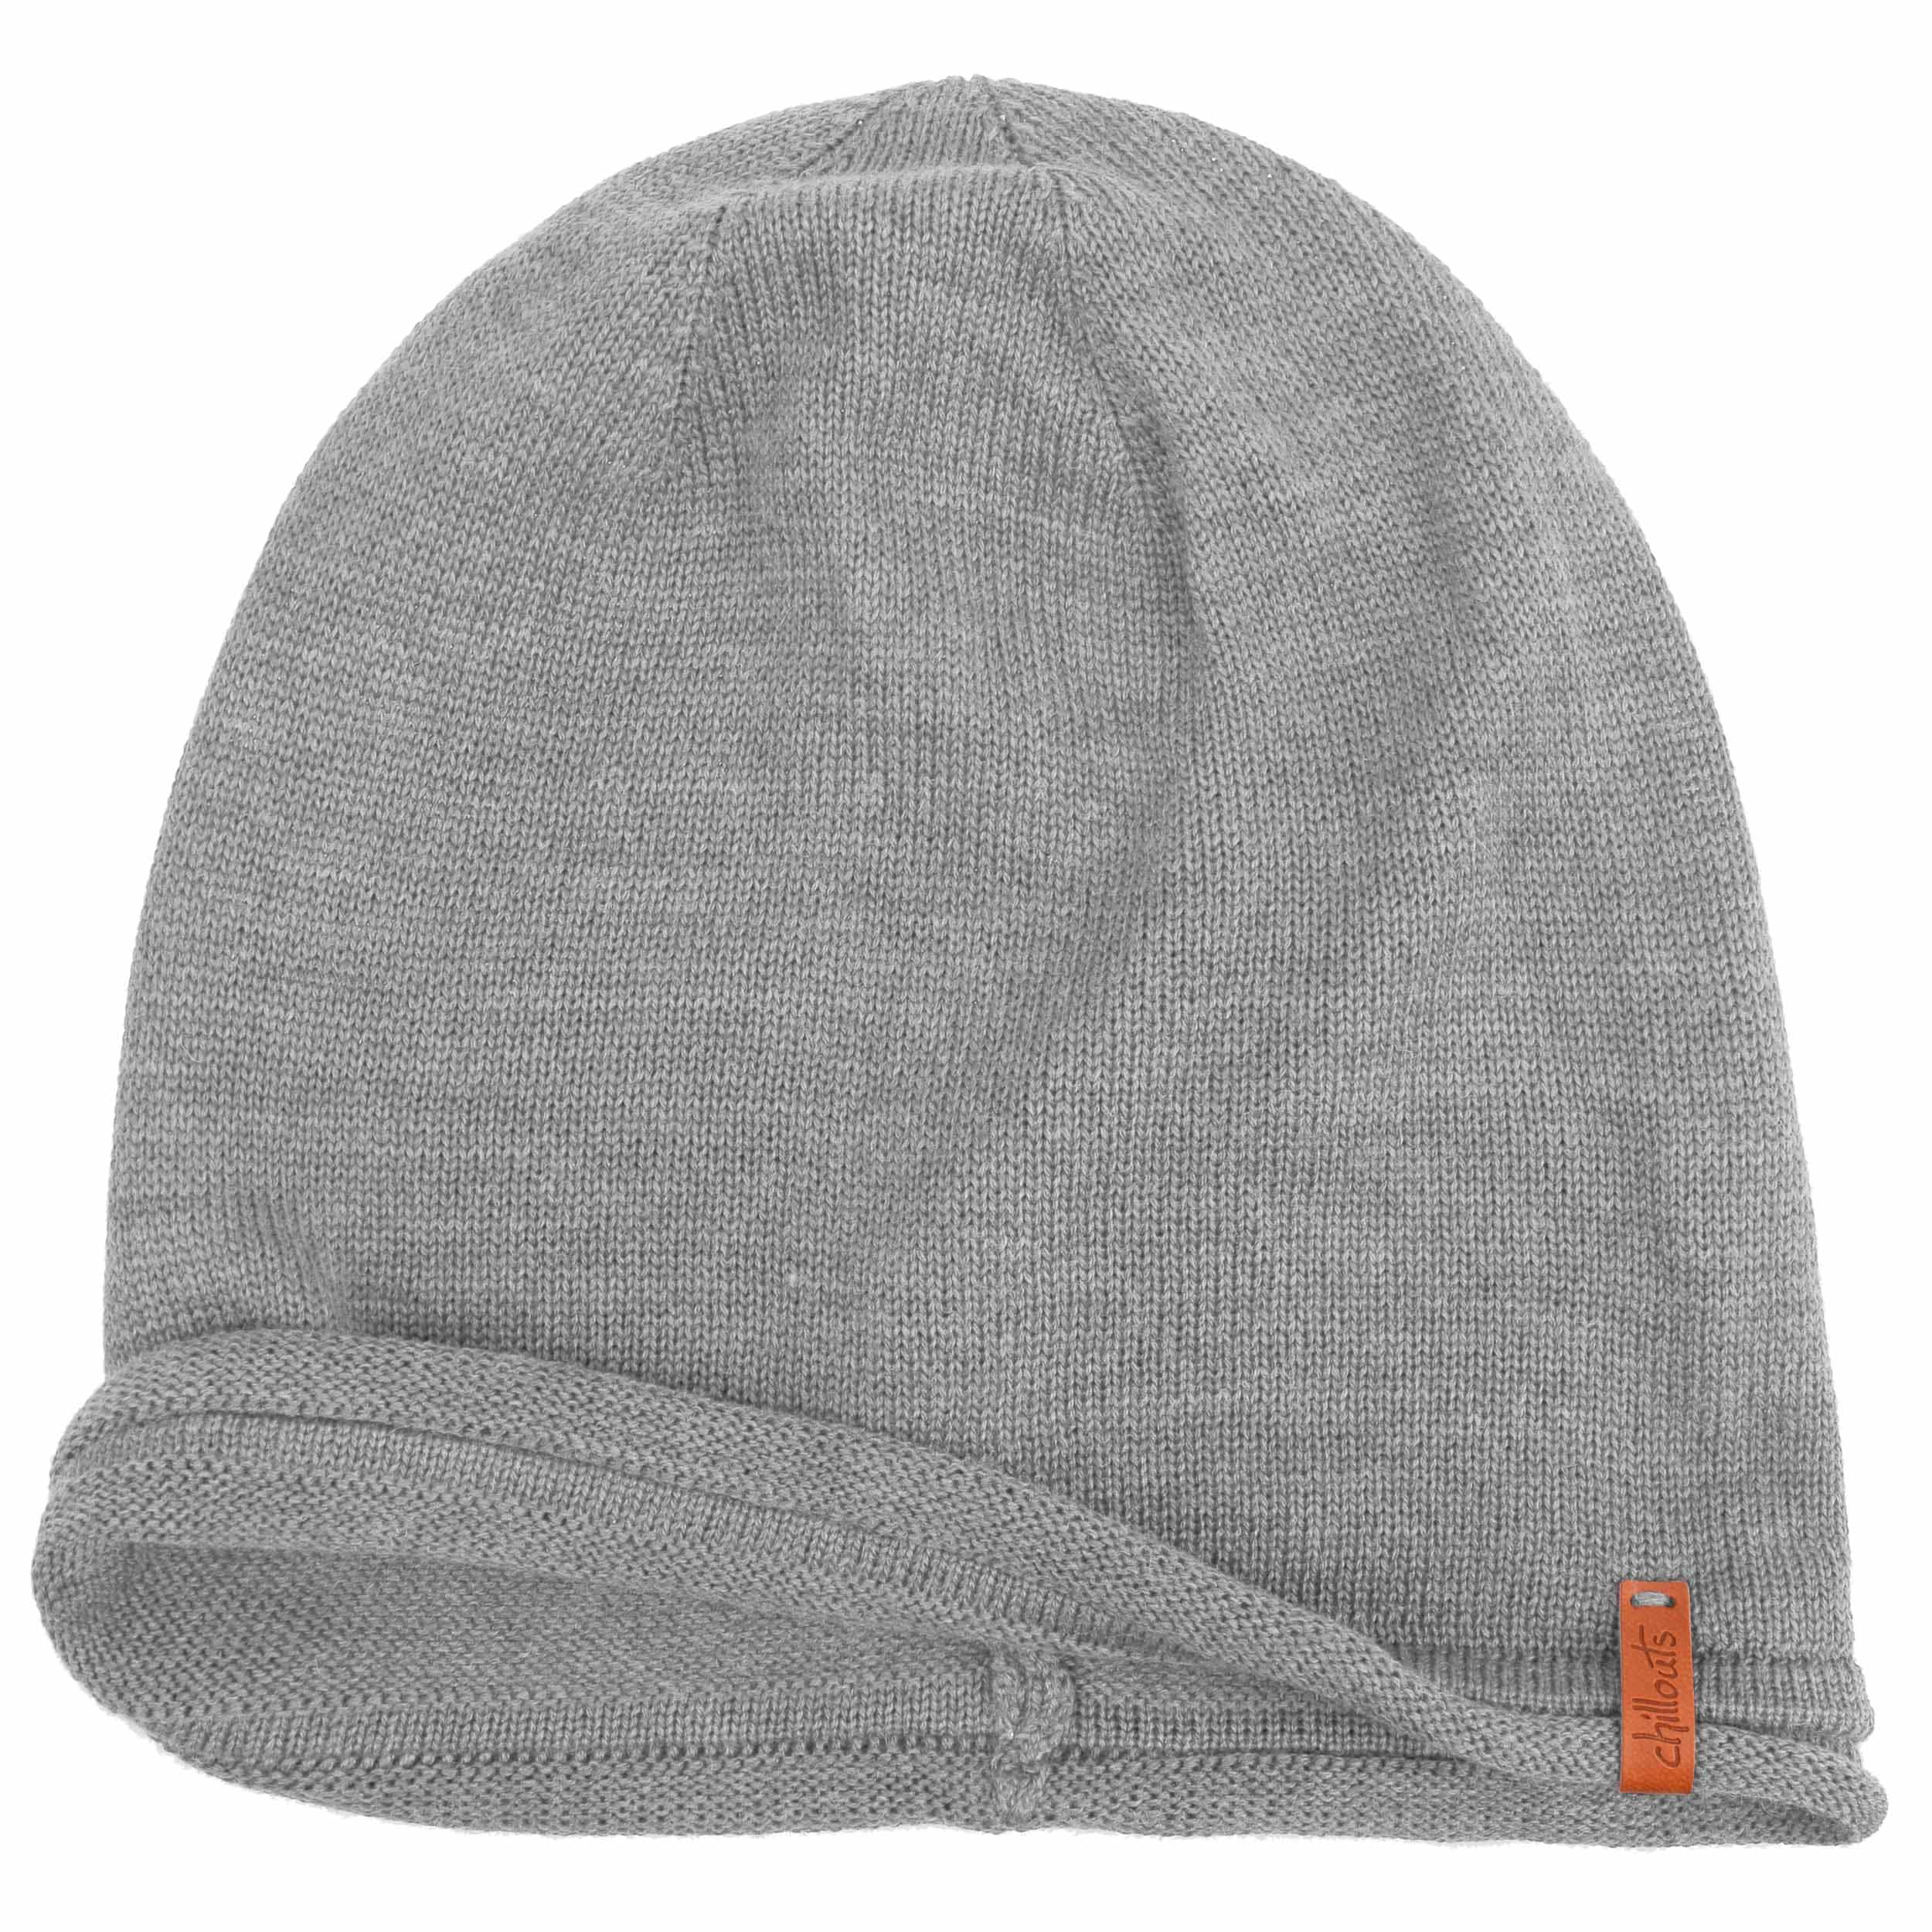 Leicester Oversize Beanie - by Chillouts 29,95 €